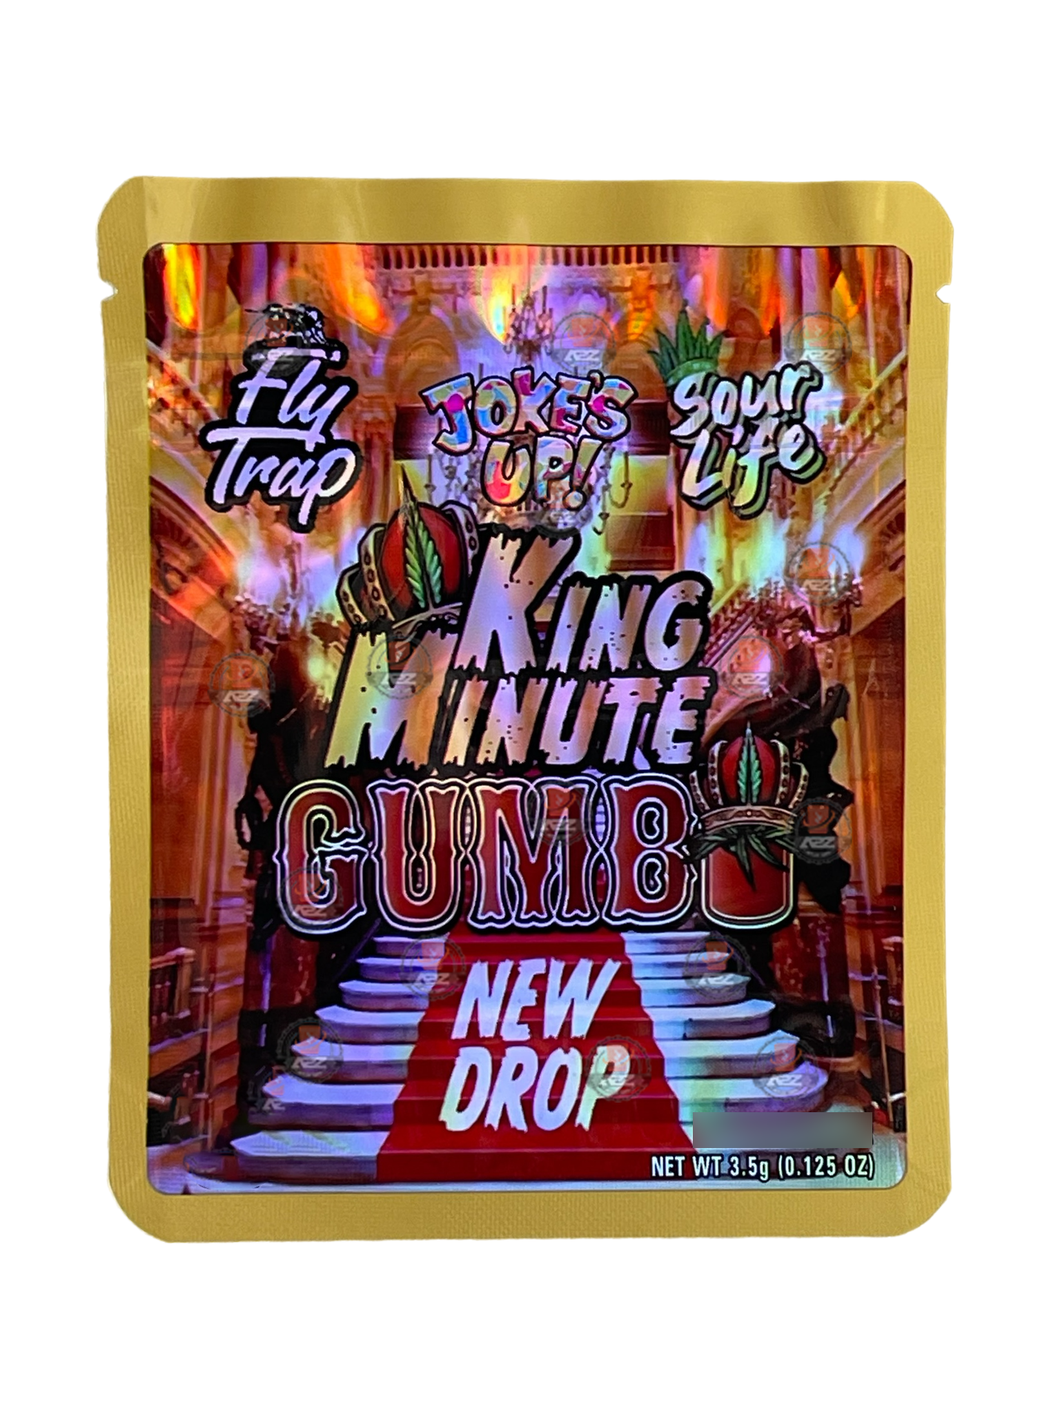 King Minute Gumbo New Drop 3.5g Mylar Bag Holographic Jokes Up Sour Life